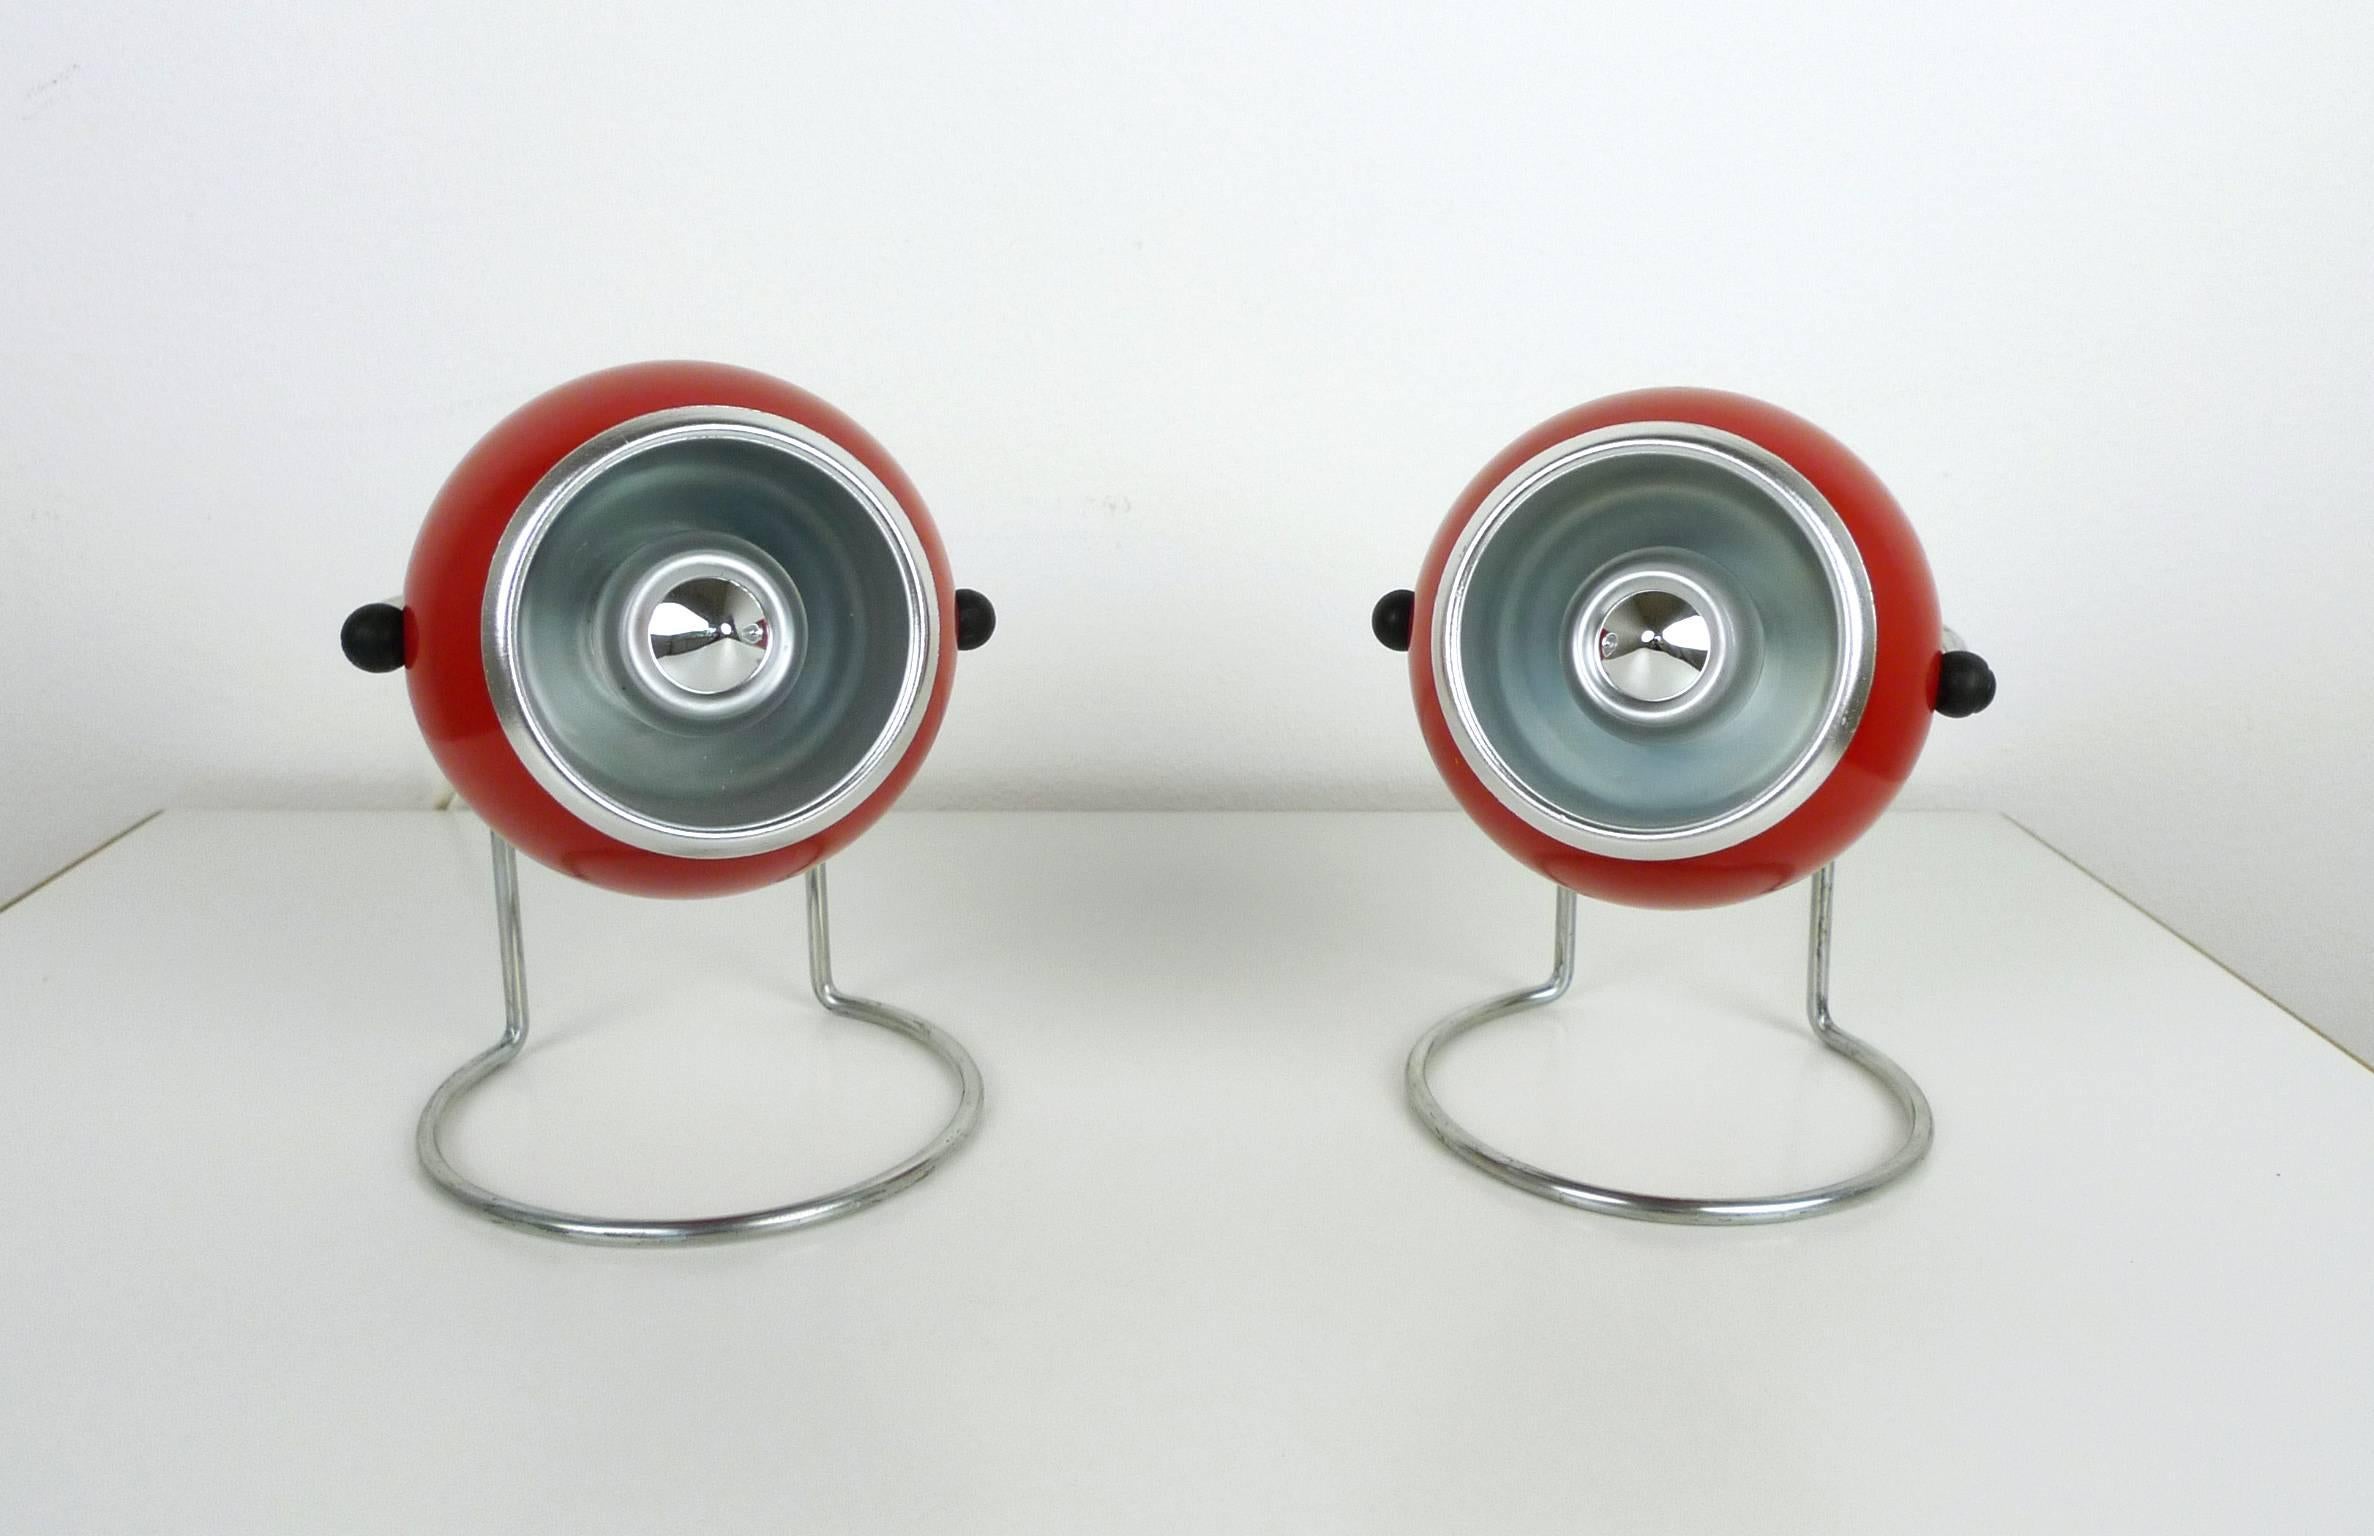 Two night lights with red lacquered metal balls on a chromed bracket made in the 1960s.
Two small black rubber bobbins connect the ball to the stand and allowing vertical rotation around the center axis. Inside there is an E 14 mount.